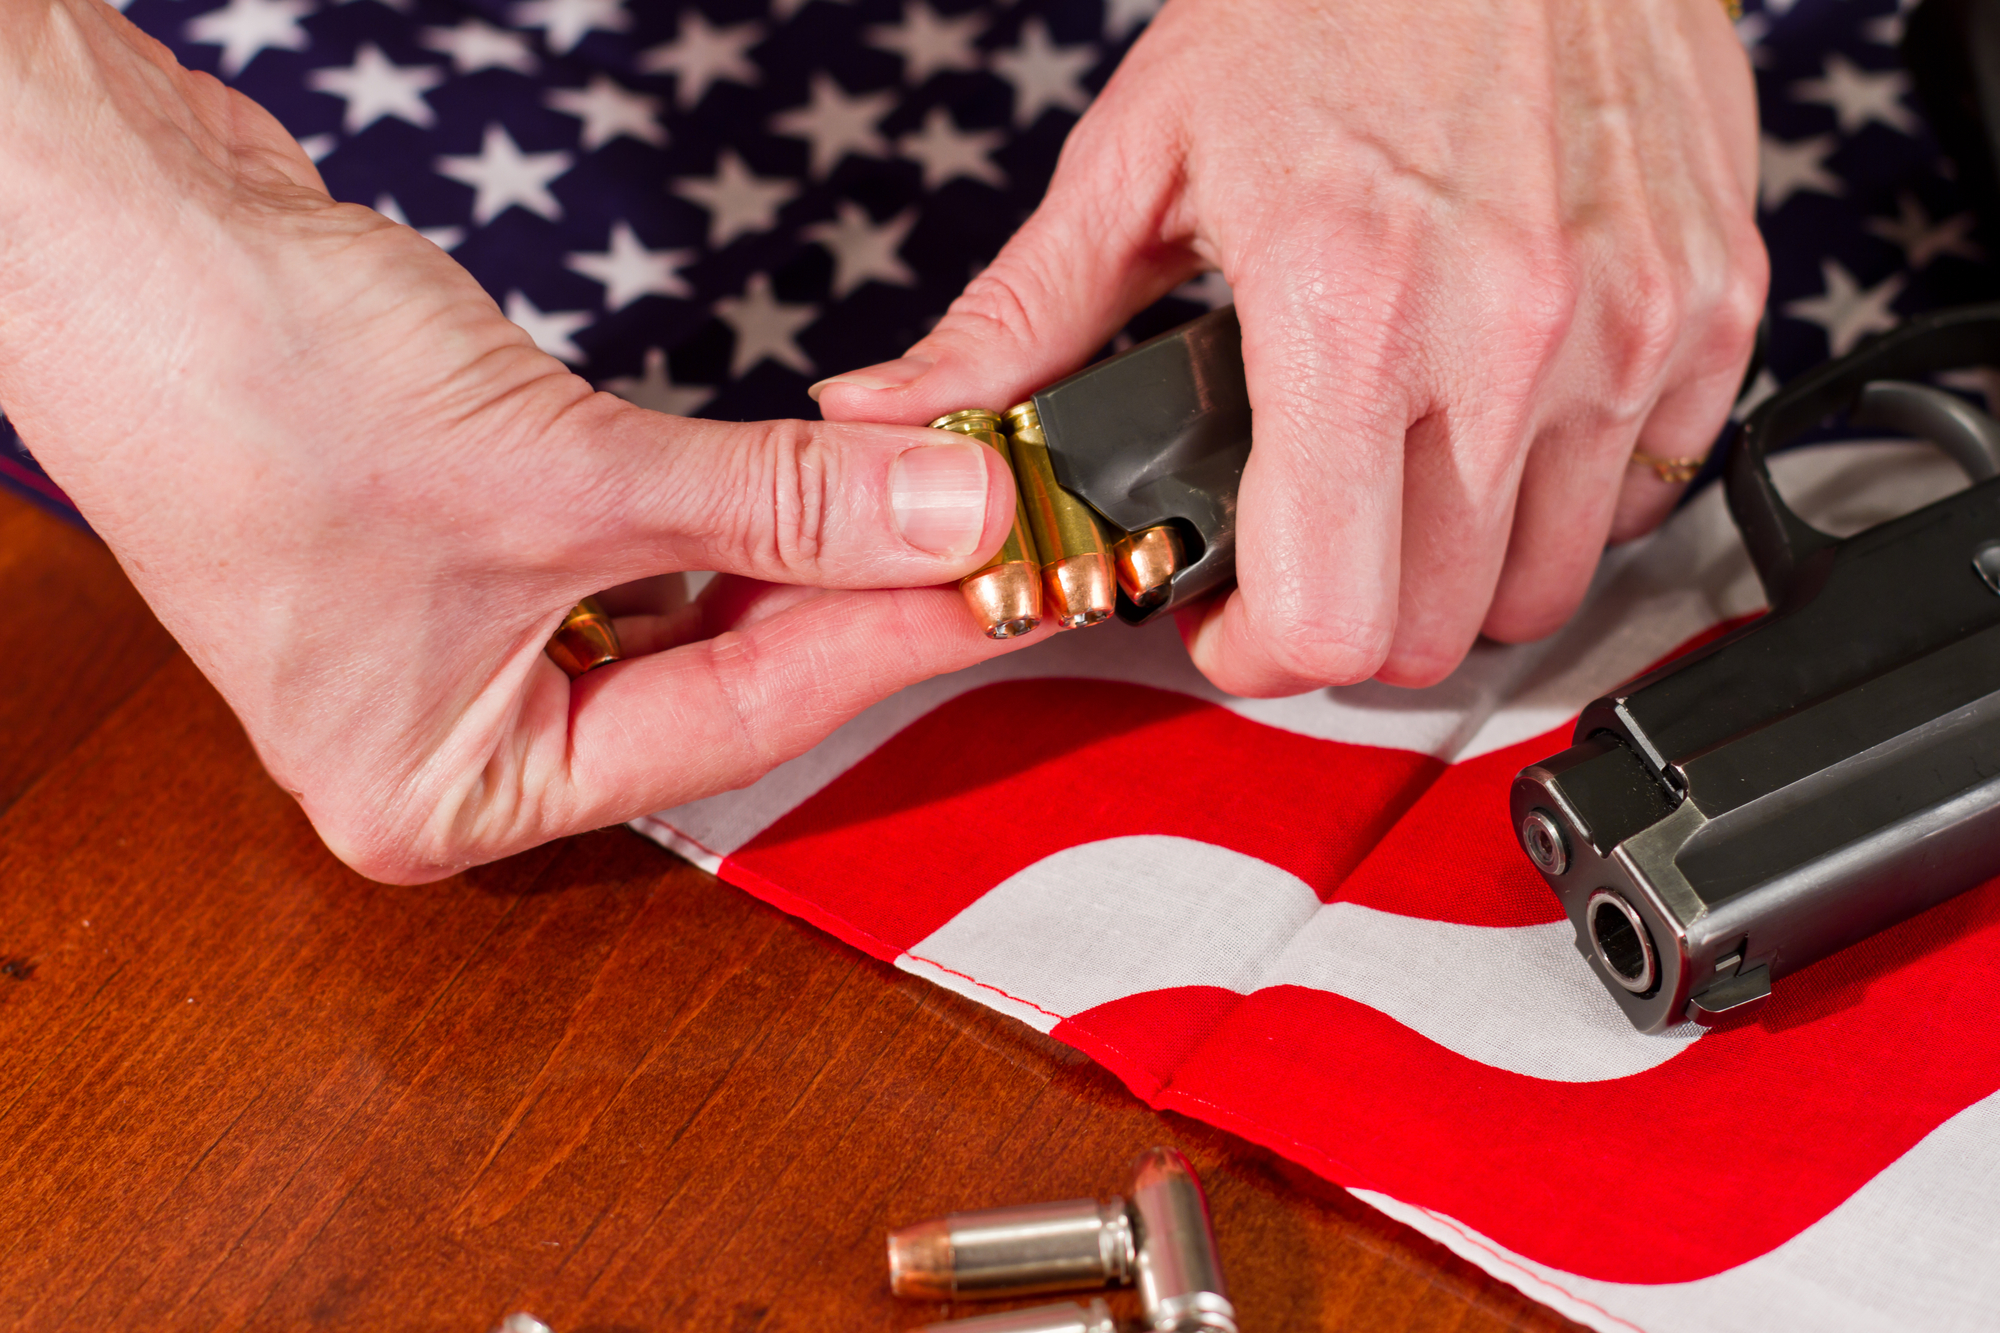 hands load a gun in front of an american flag